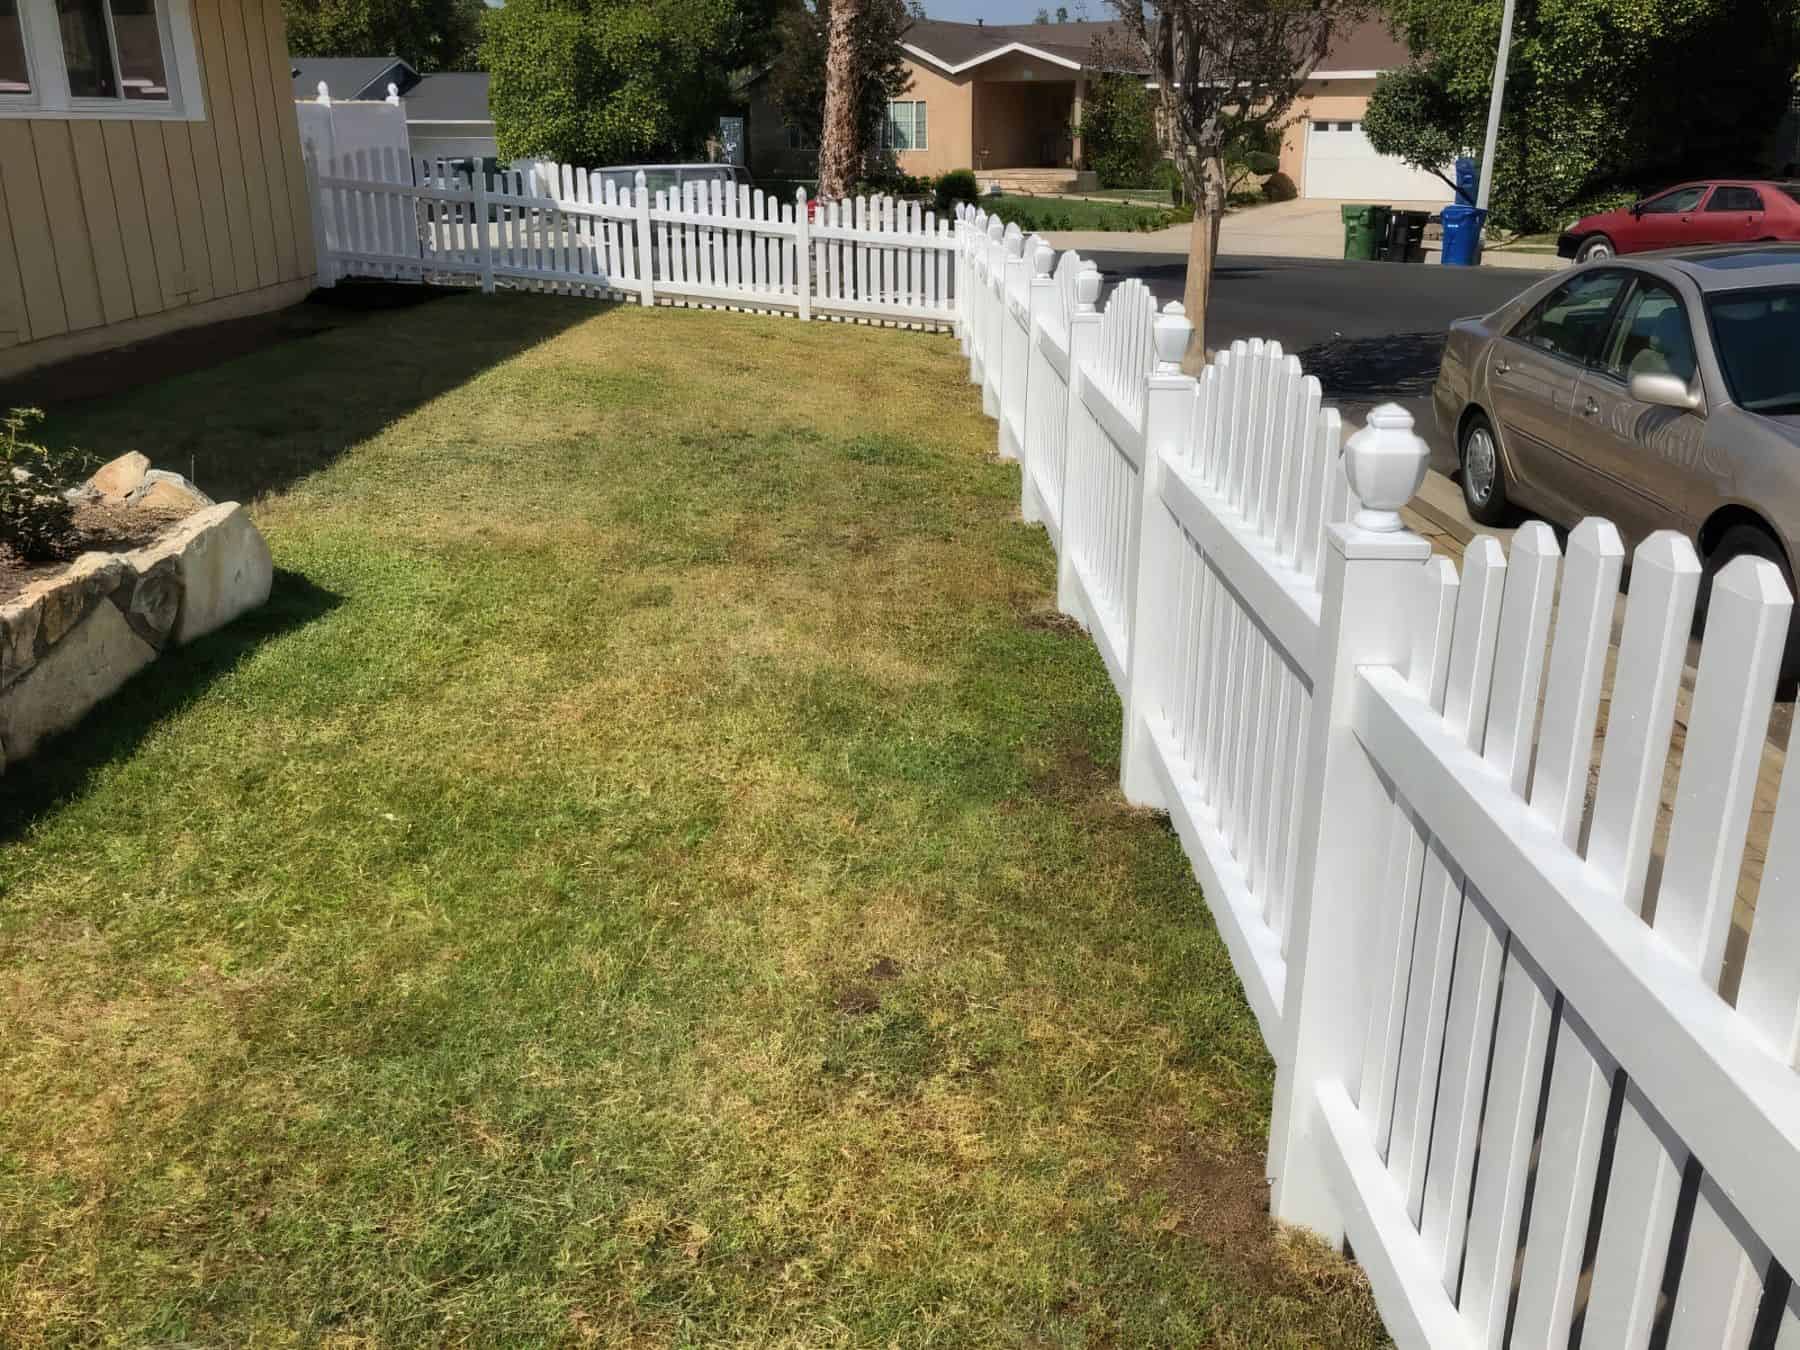 Vinyl dog ear picket fence & ranch suburban house, with cars in the background. Concrete sidewalk & driveway complete the scene.